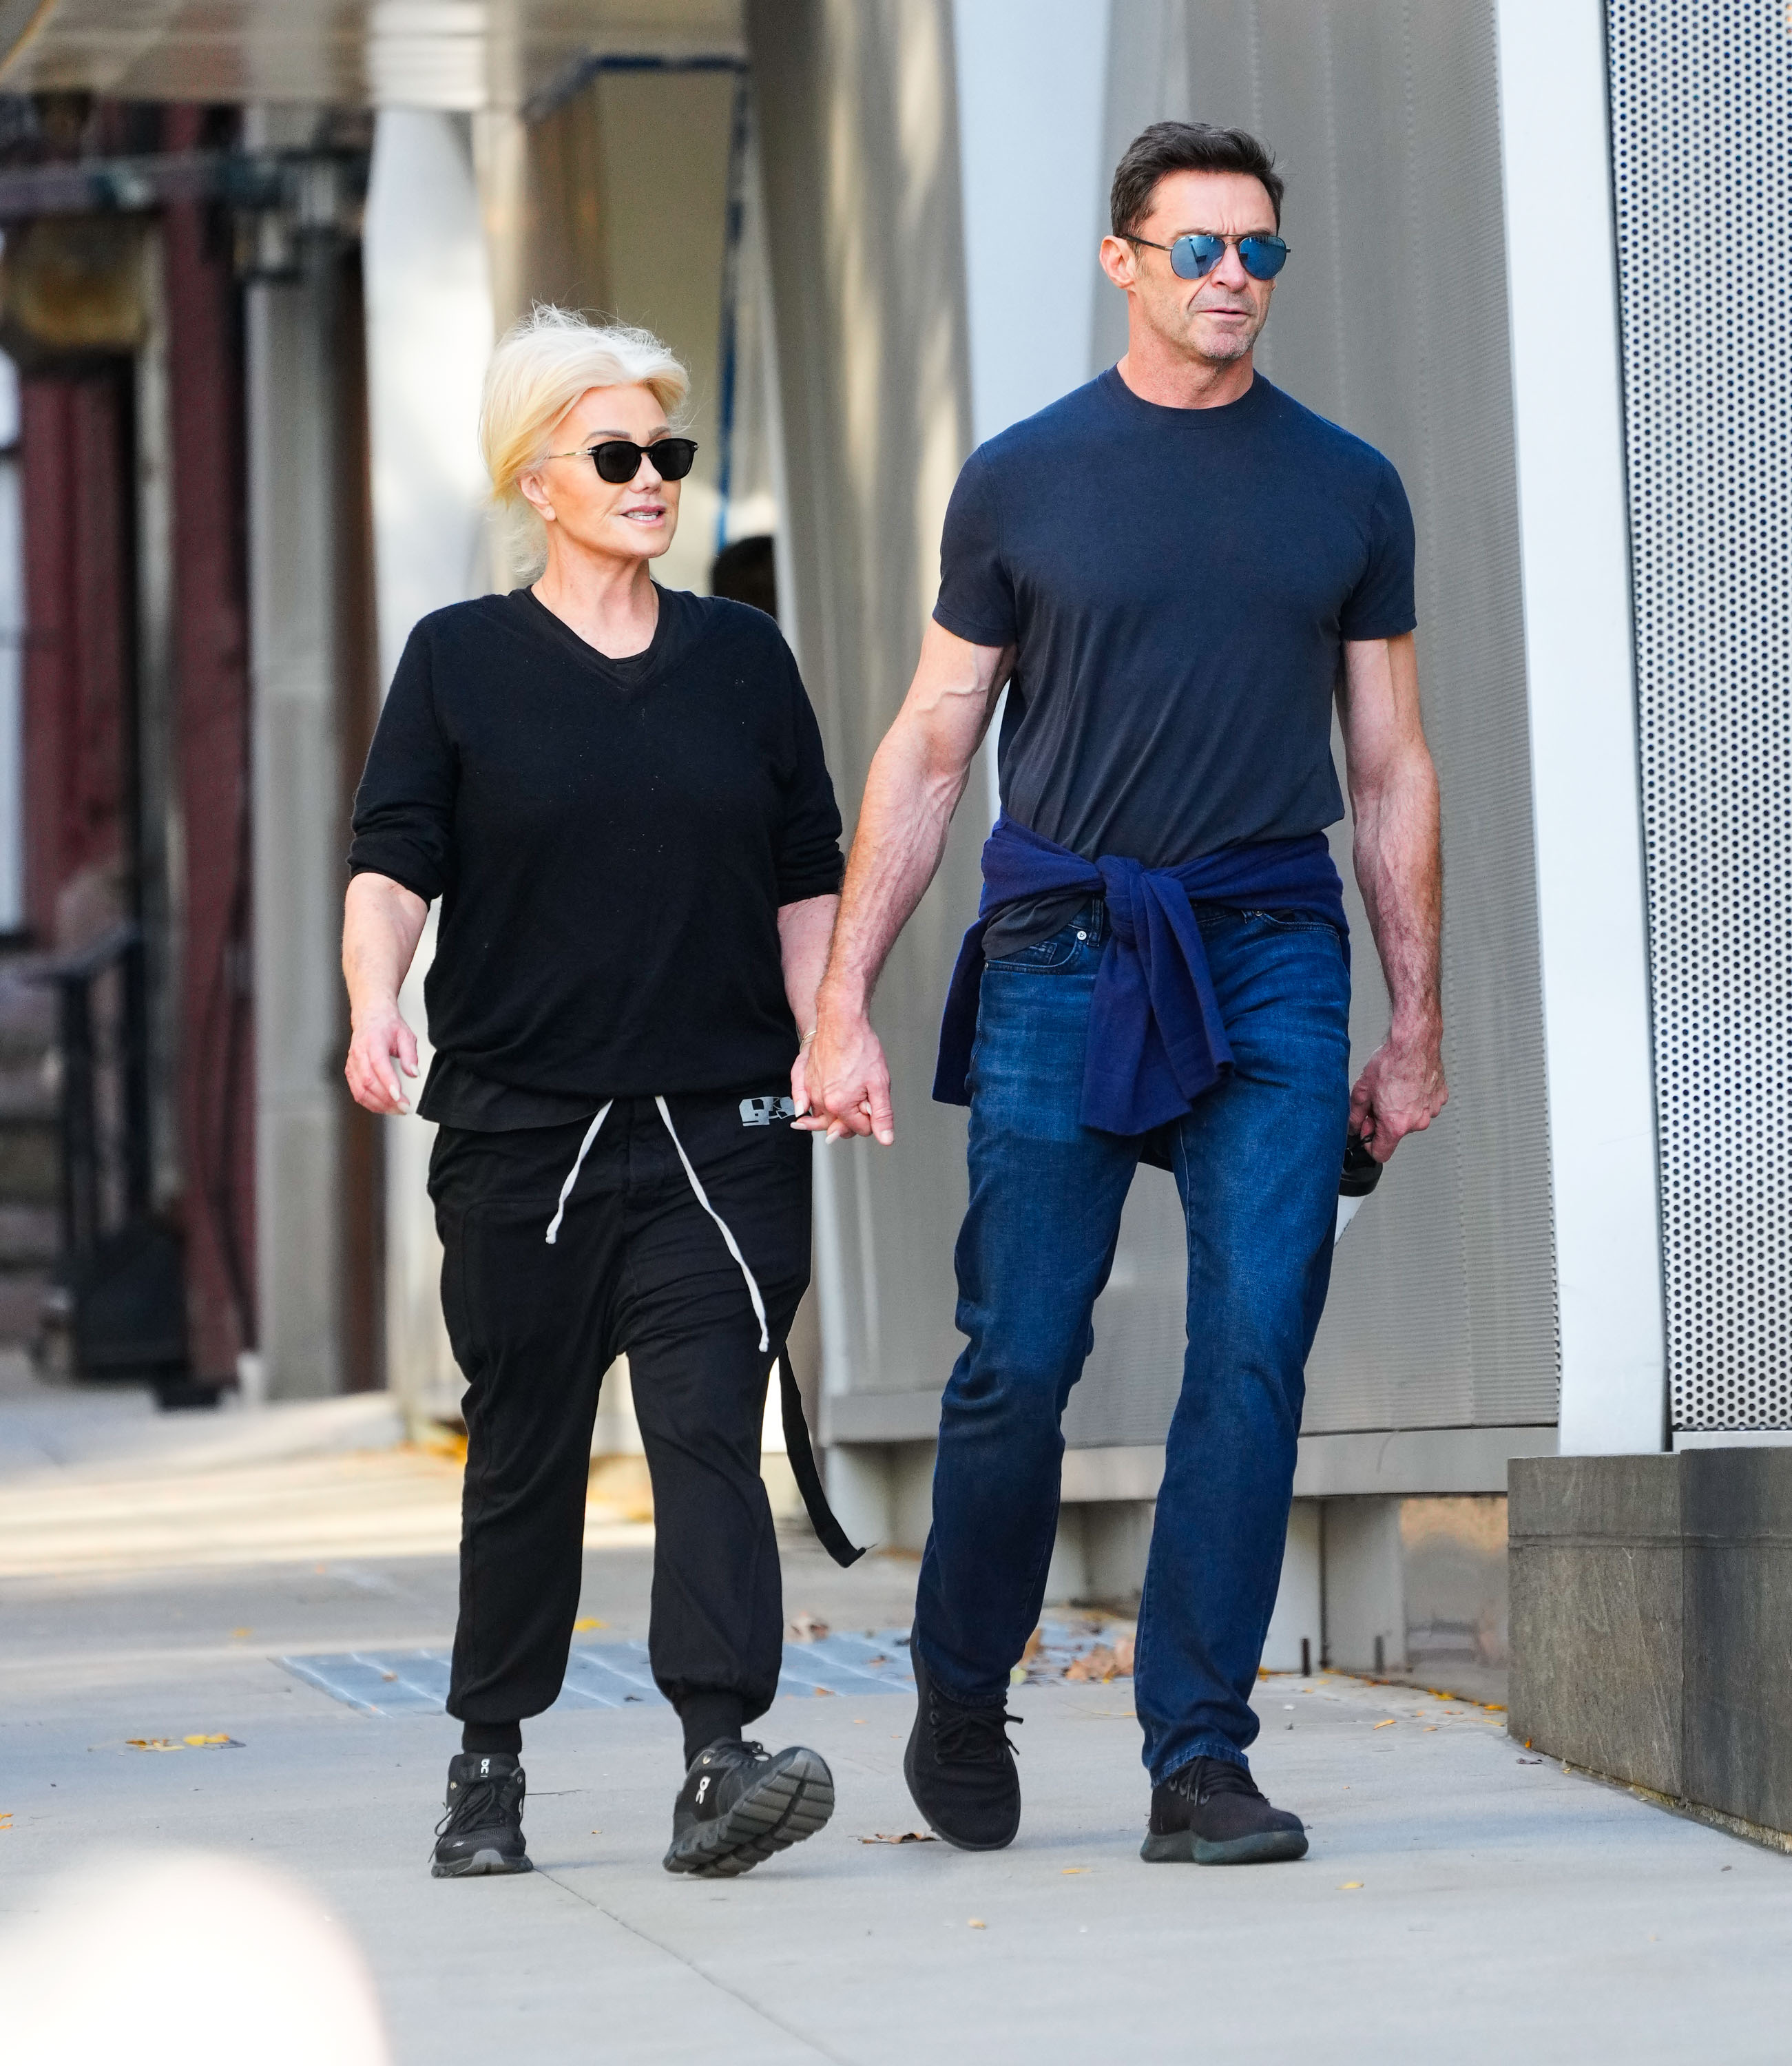 Deborra-Lee Furness and Hugh Jackman sighted in New York City, 2022 | Source: Getty Images